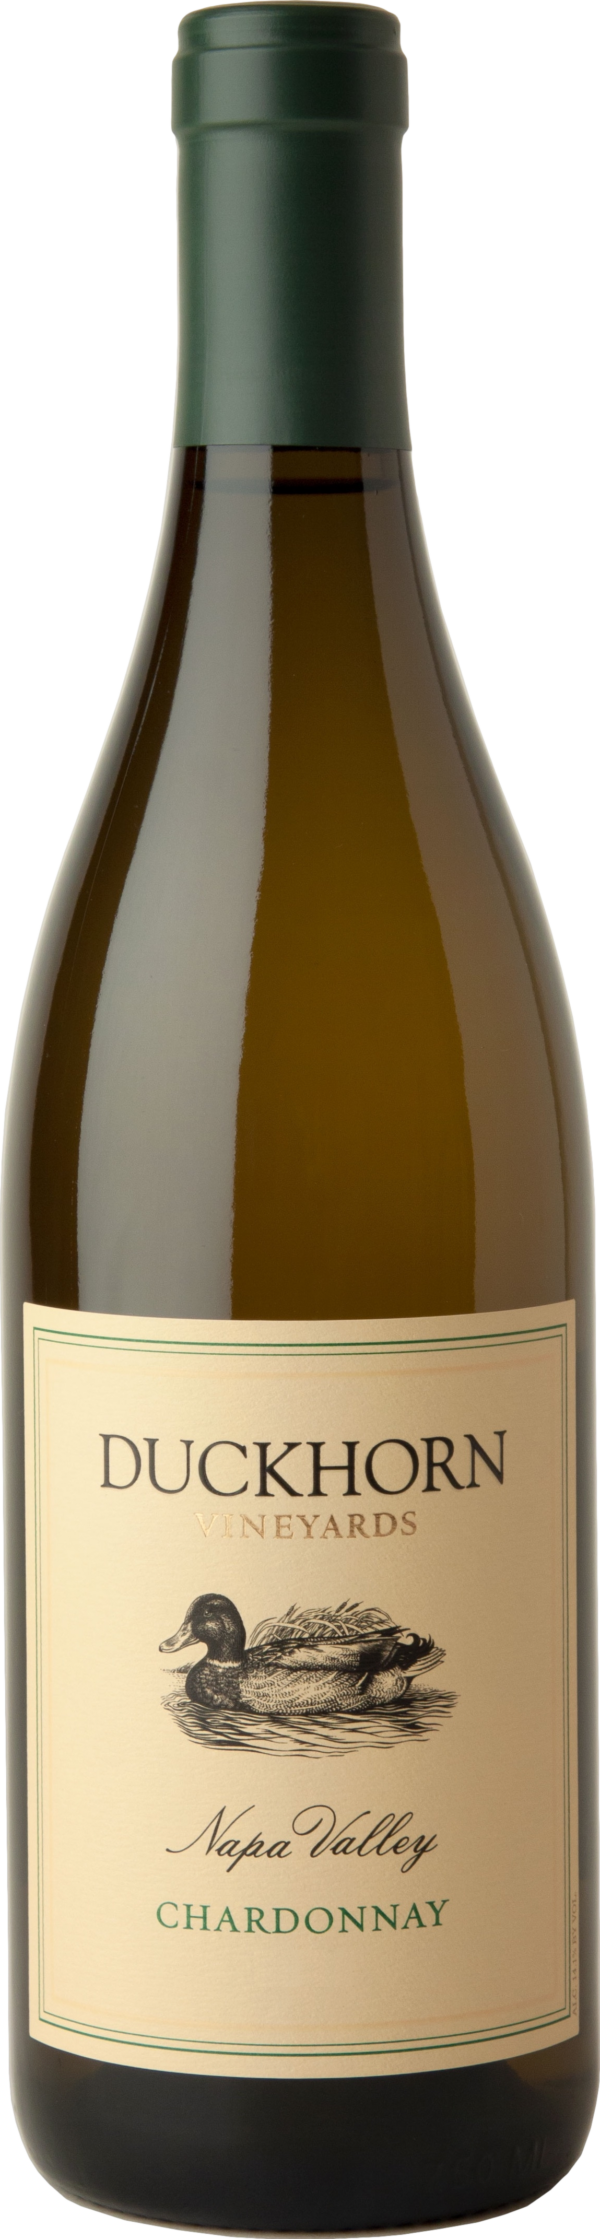 Product image of Duckhorn Napa Valley Chardonnay 2021 from 8wines